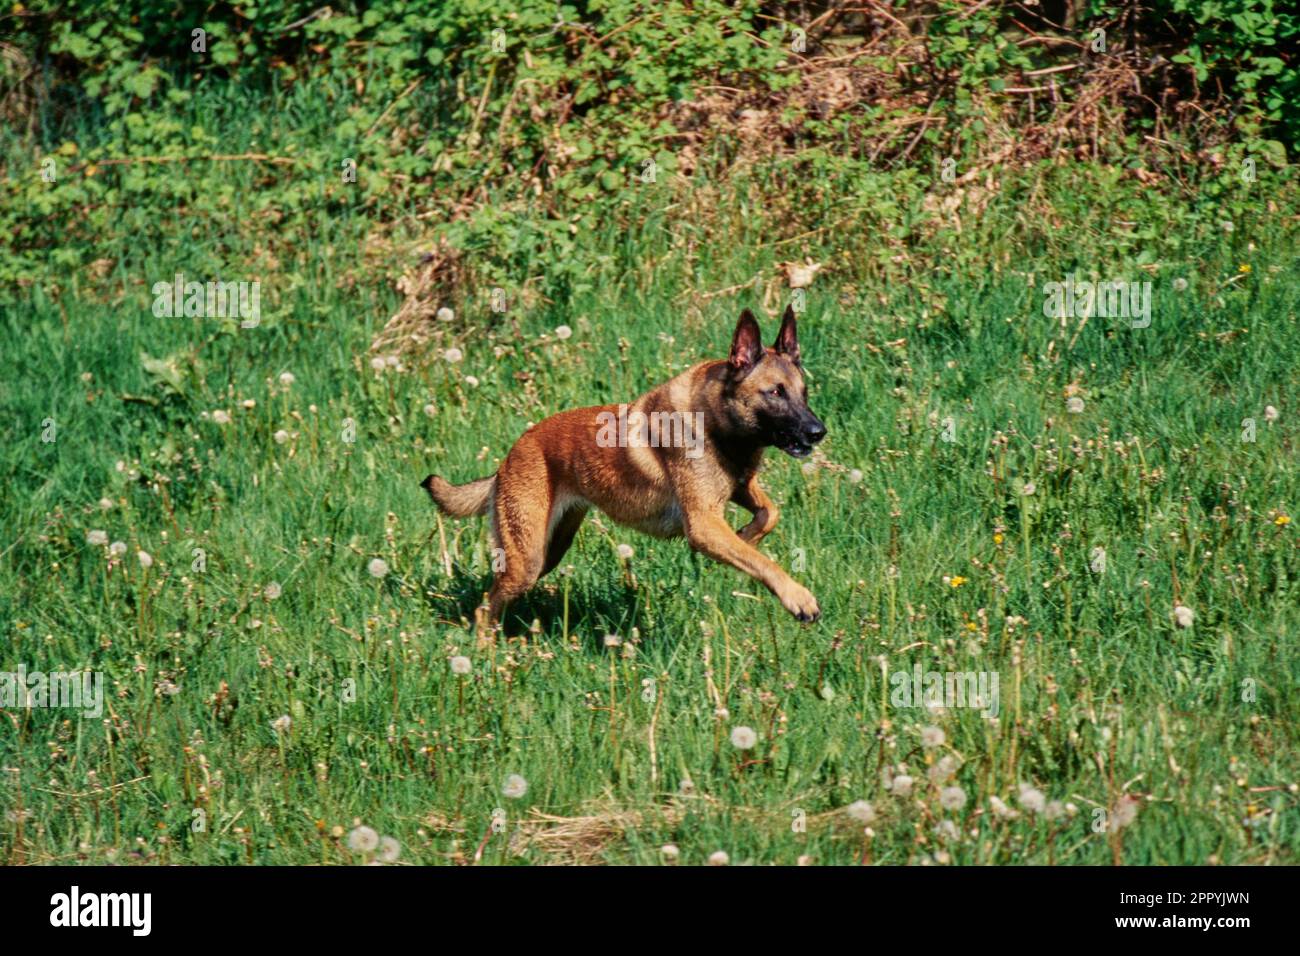 Belgian Shepherd outside running through field of dandelions with bushes in background Stock Photo